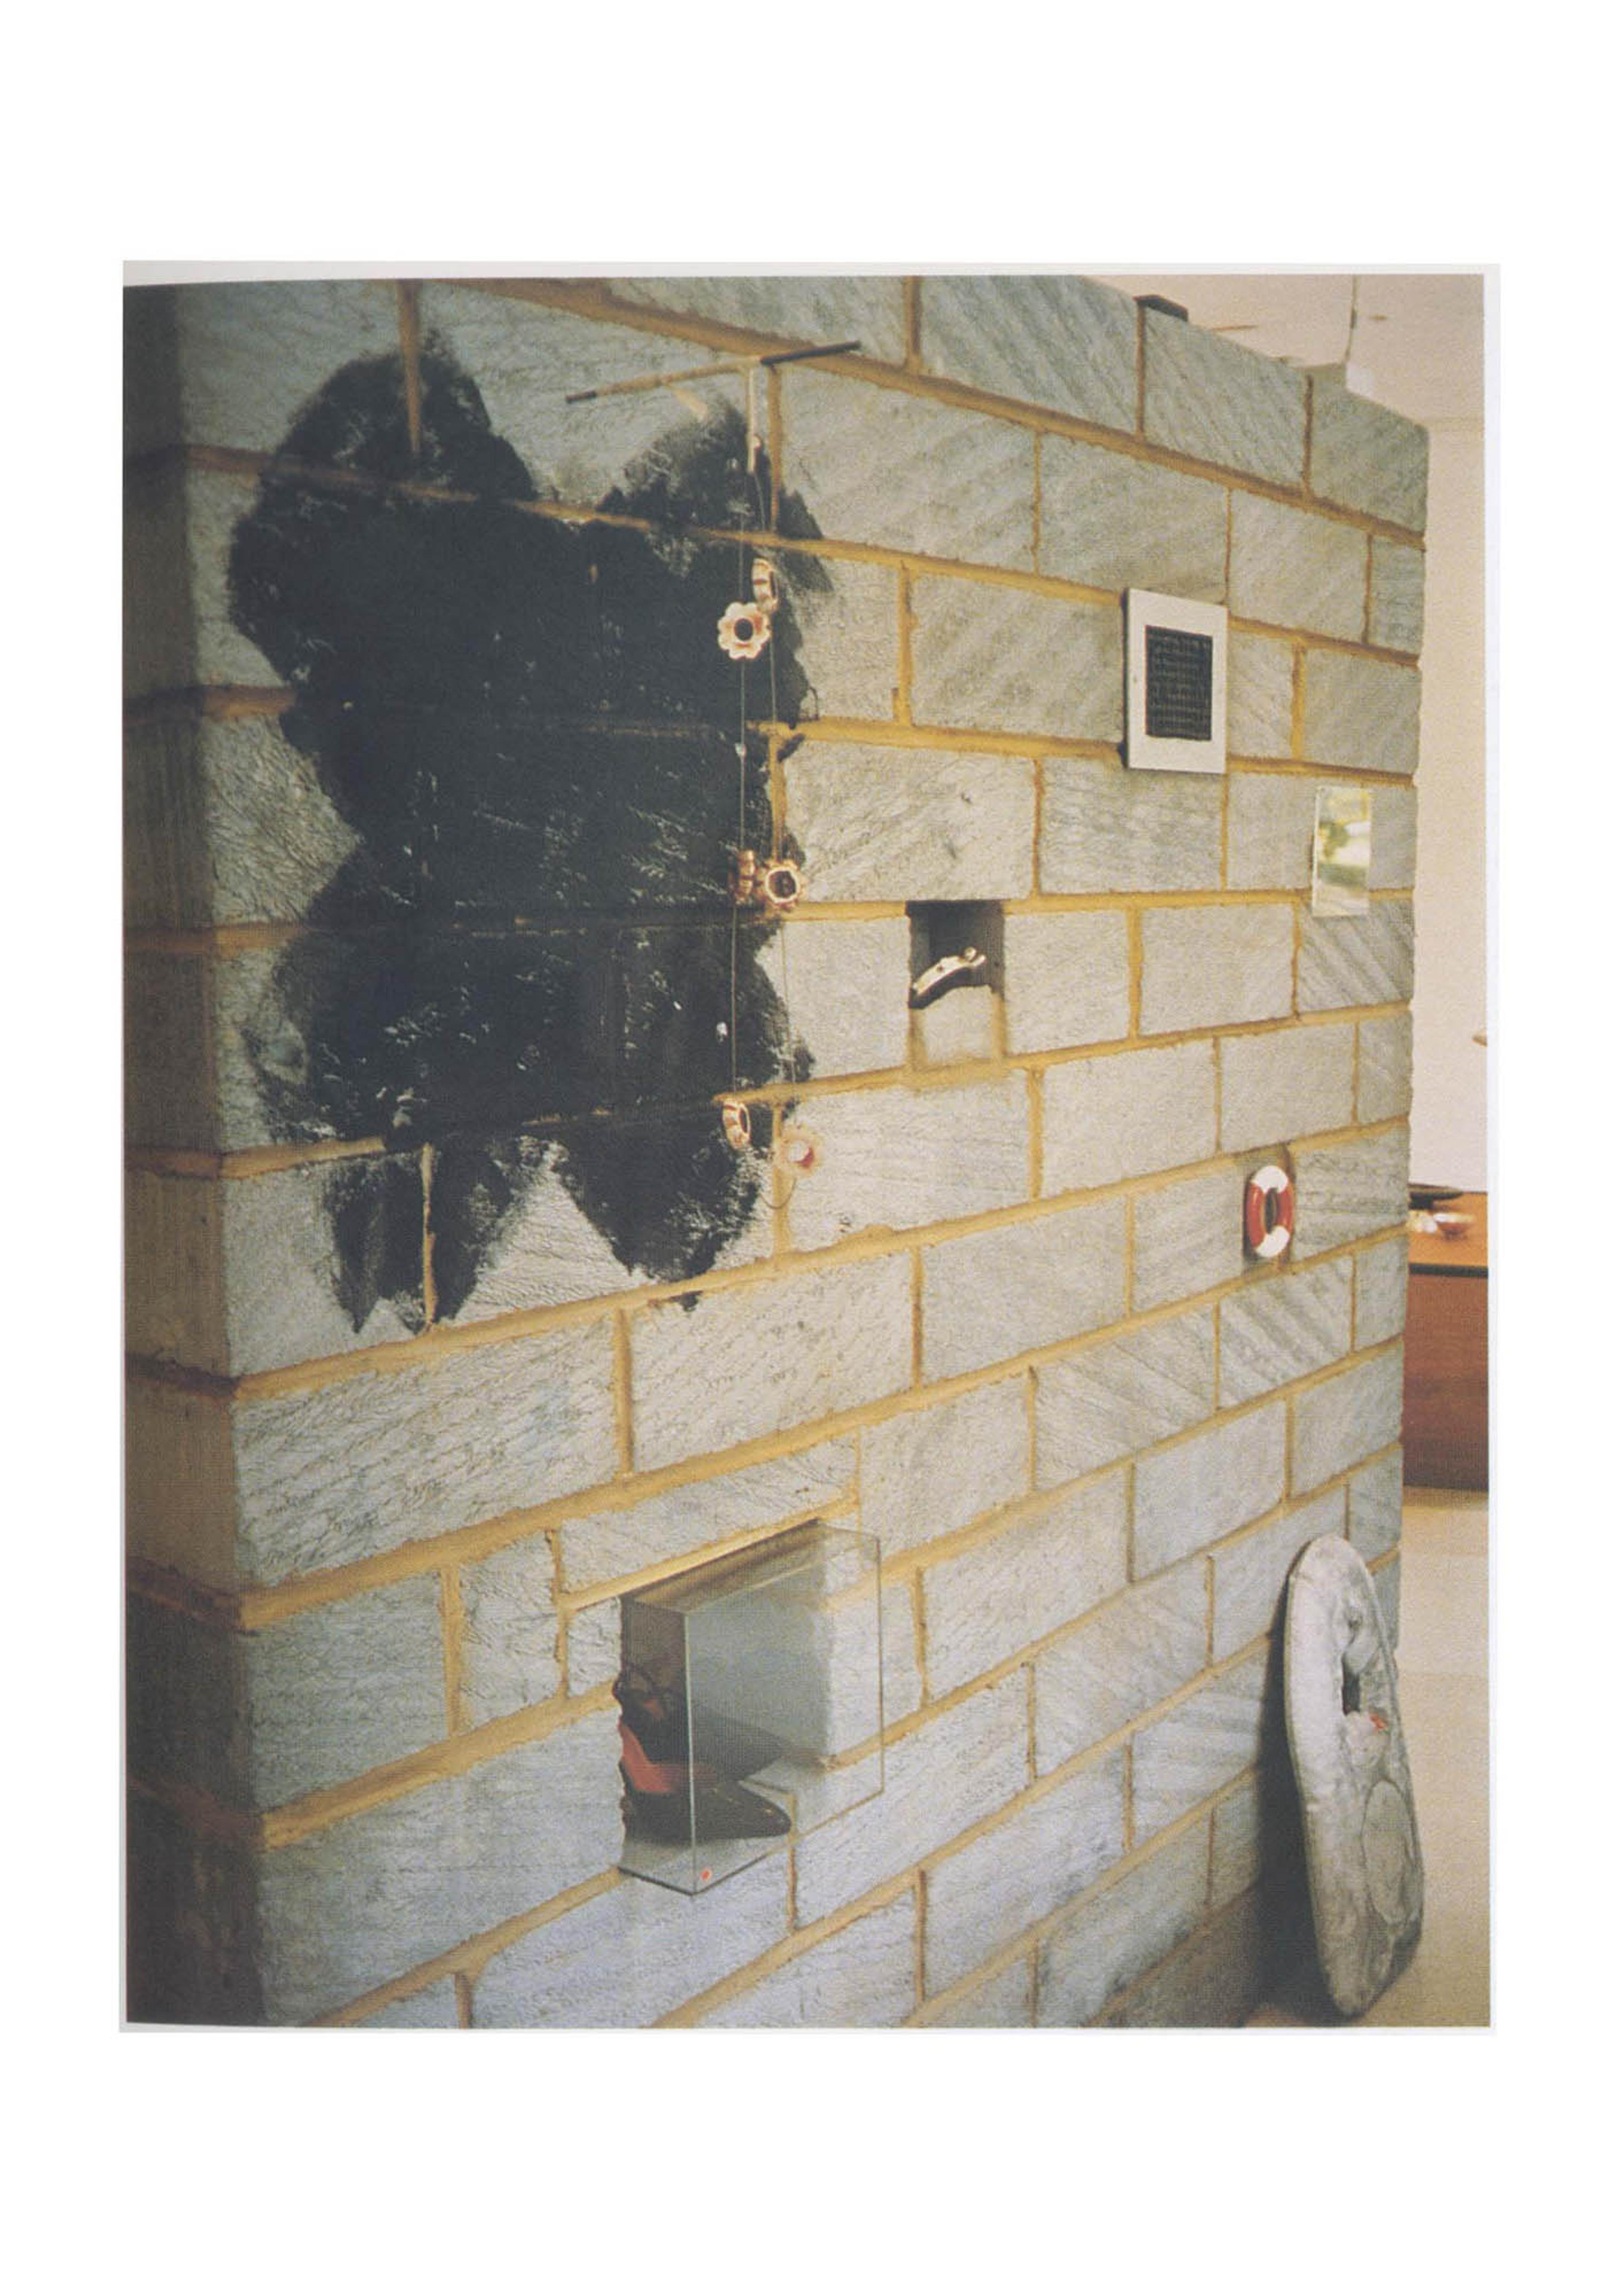 (1999) Fiona Mulholland, A Life in the Day of…Strategies of Survival, mixed media, wall drawing, 300 x 300 cm